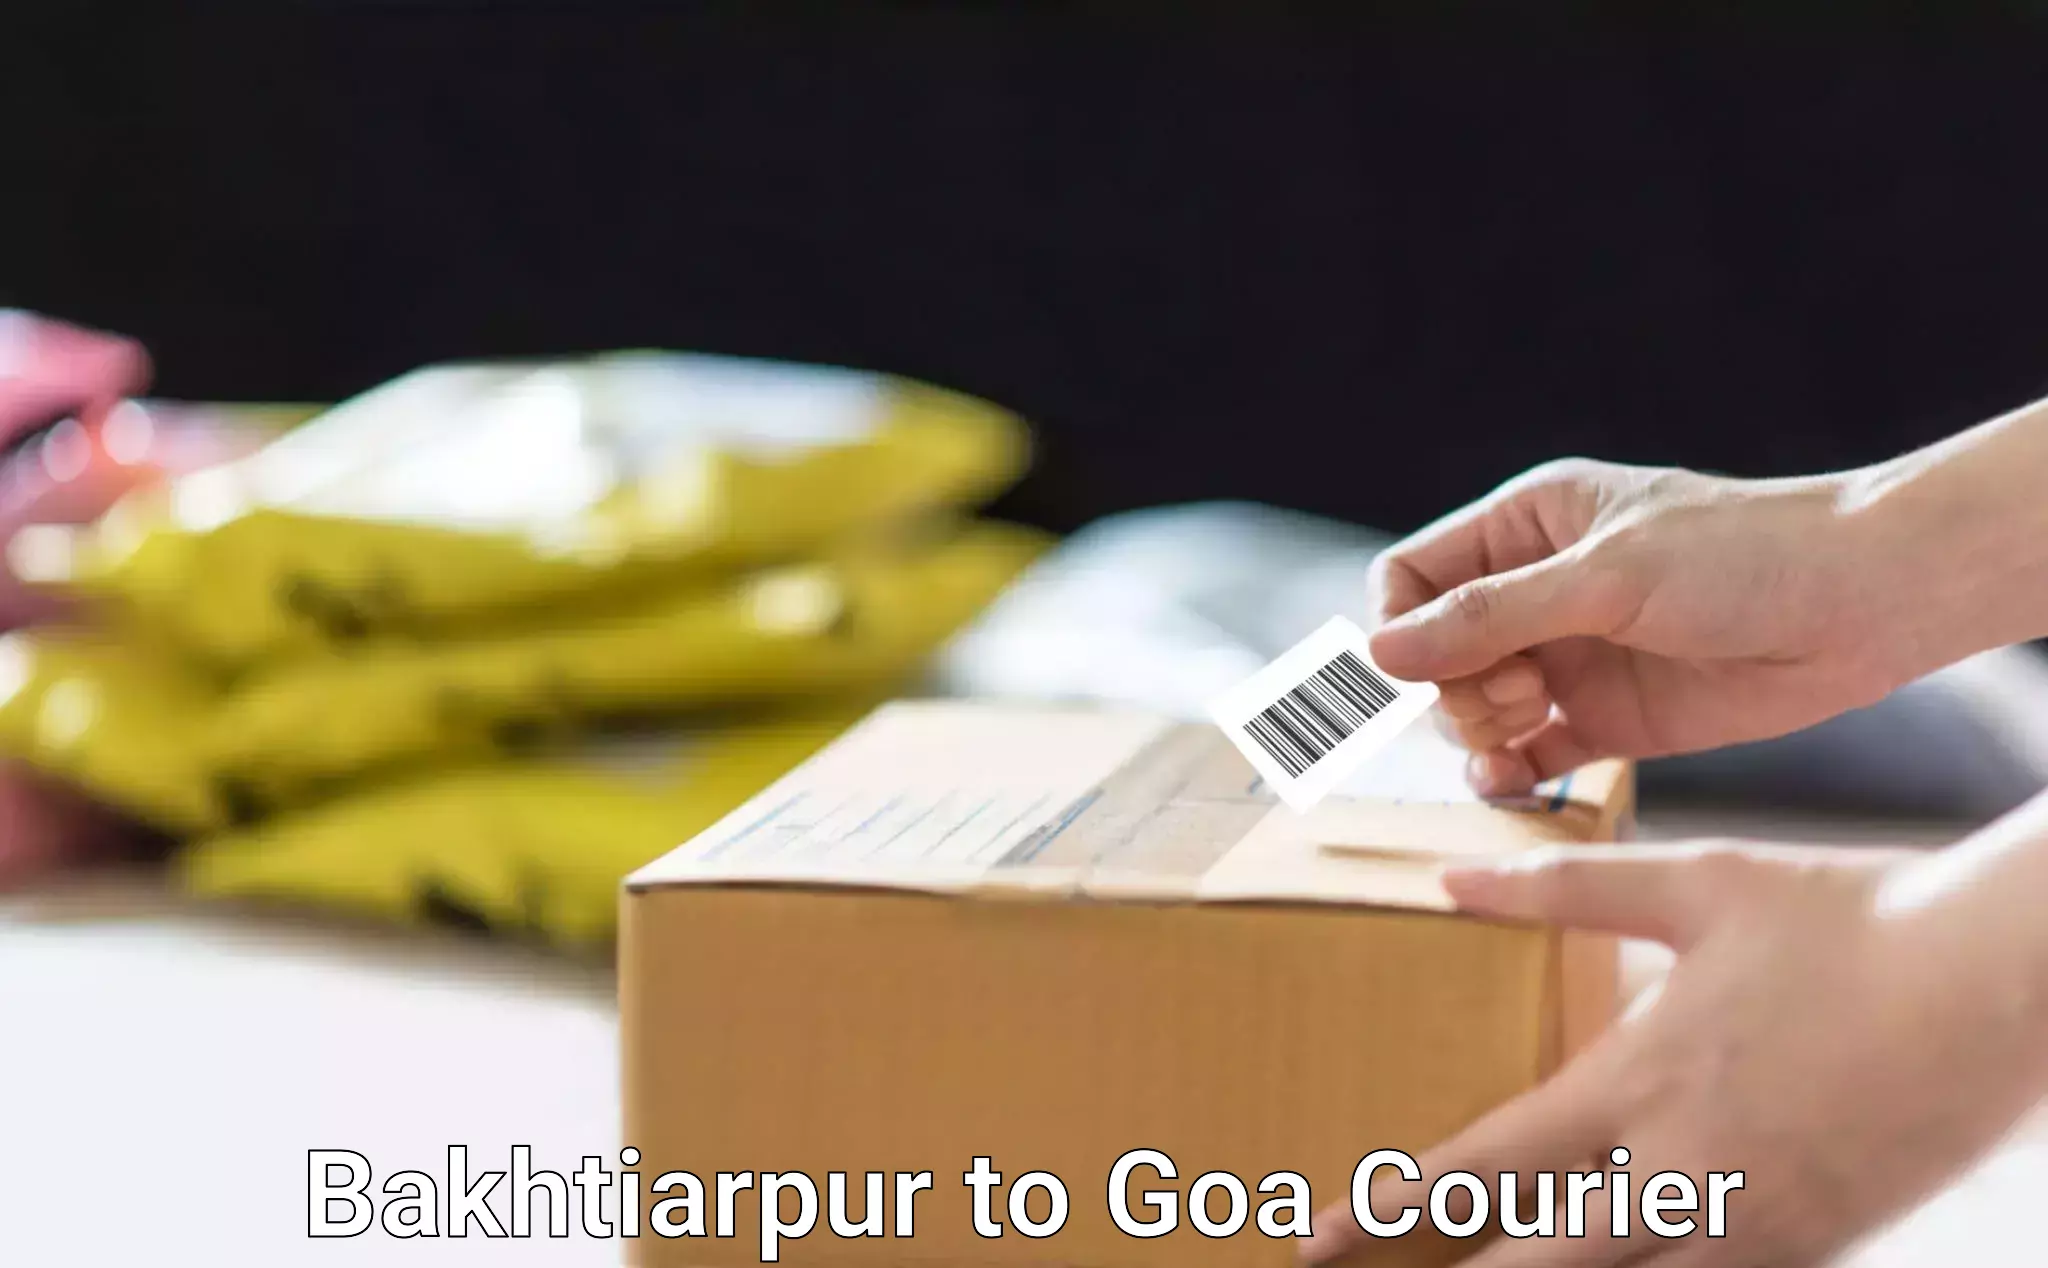 Home relocation experts Bakhtiarpur to South Goa